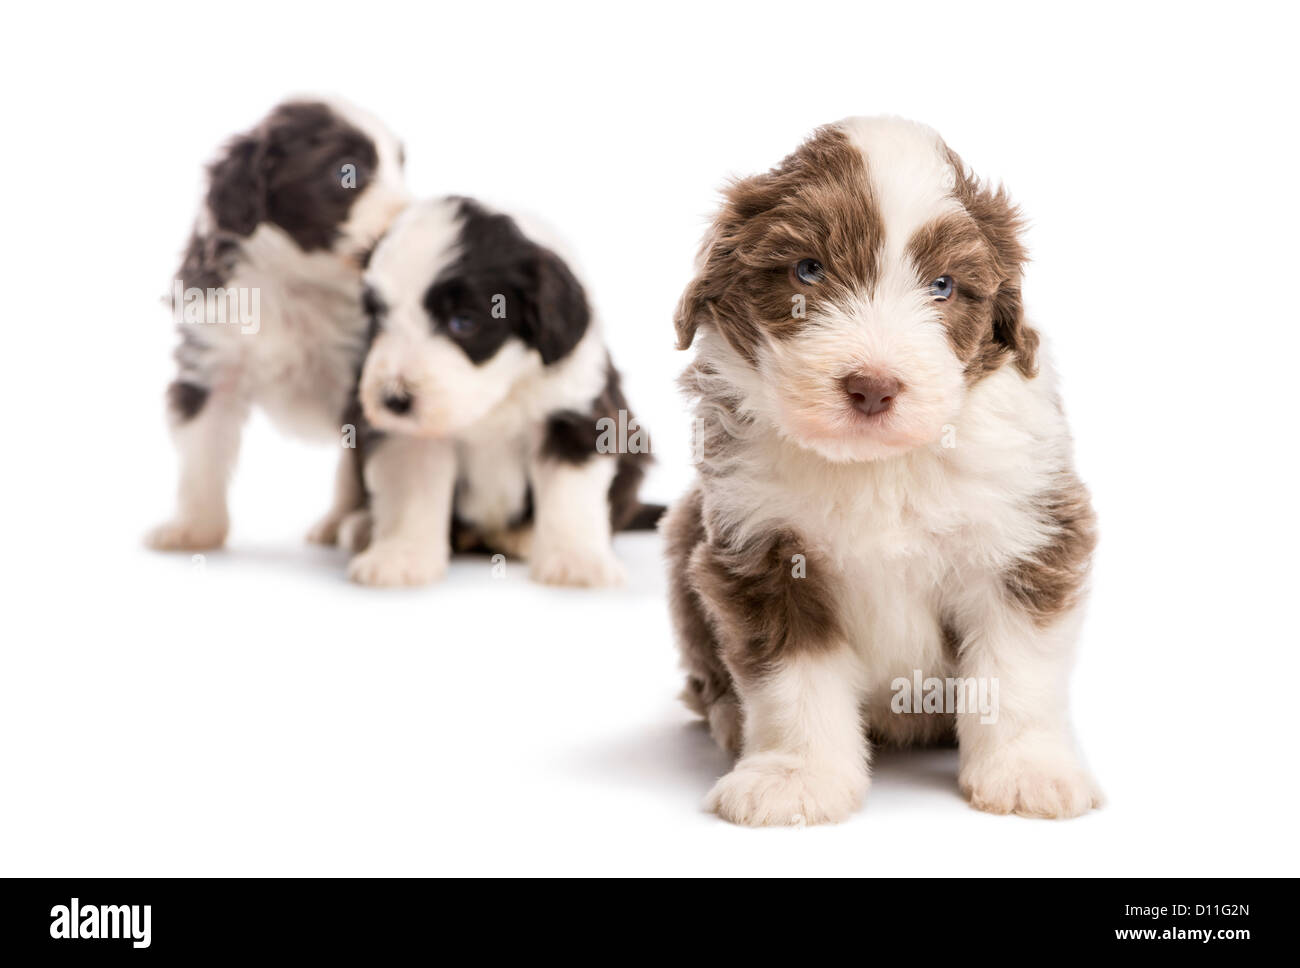 Bearded Collie puppy, 6 weeks old, sitting and standing with focus on foreground against white background Stock Photo